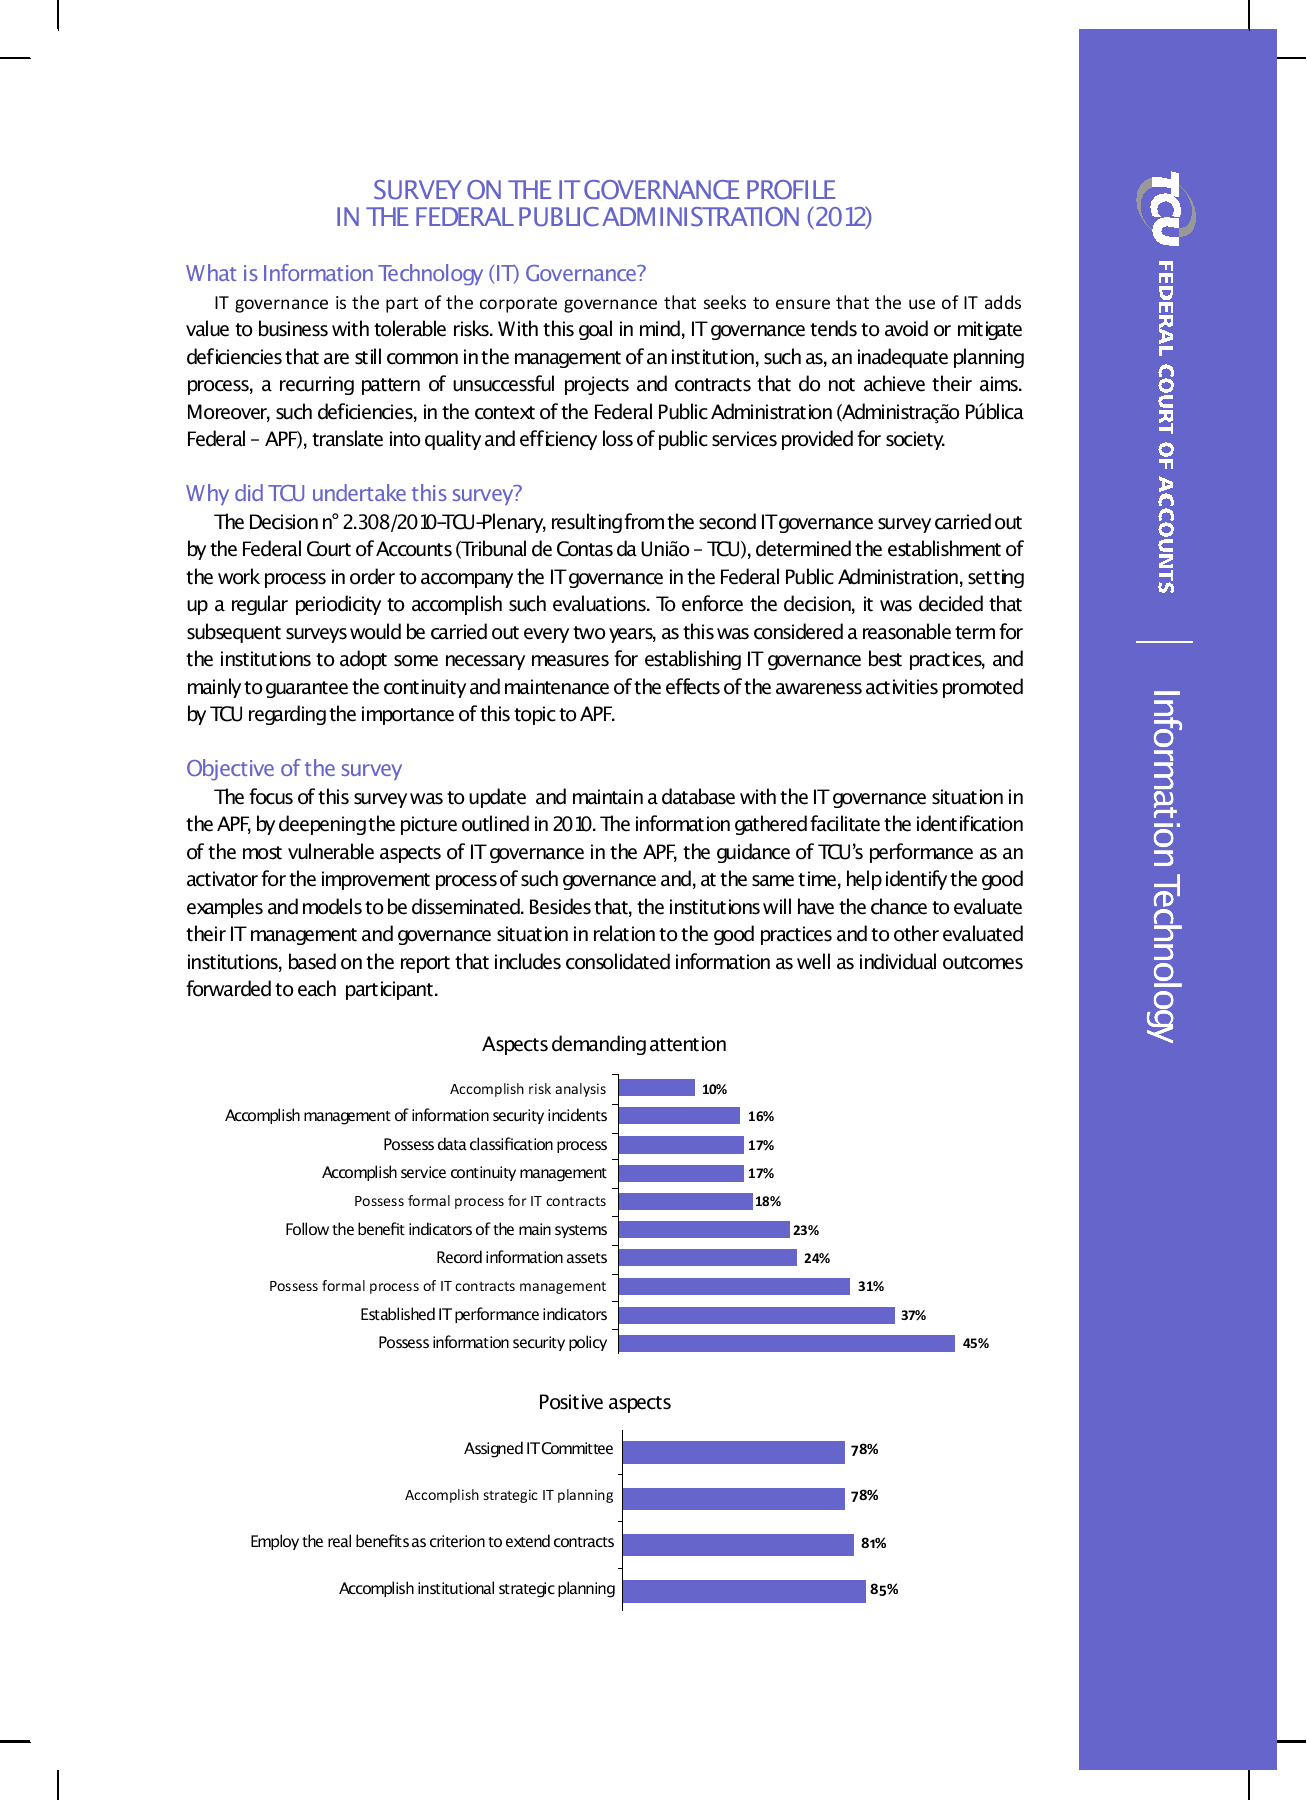 survey on the it governance profile in the federal public administration.png